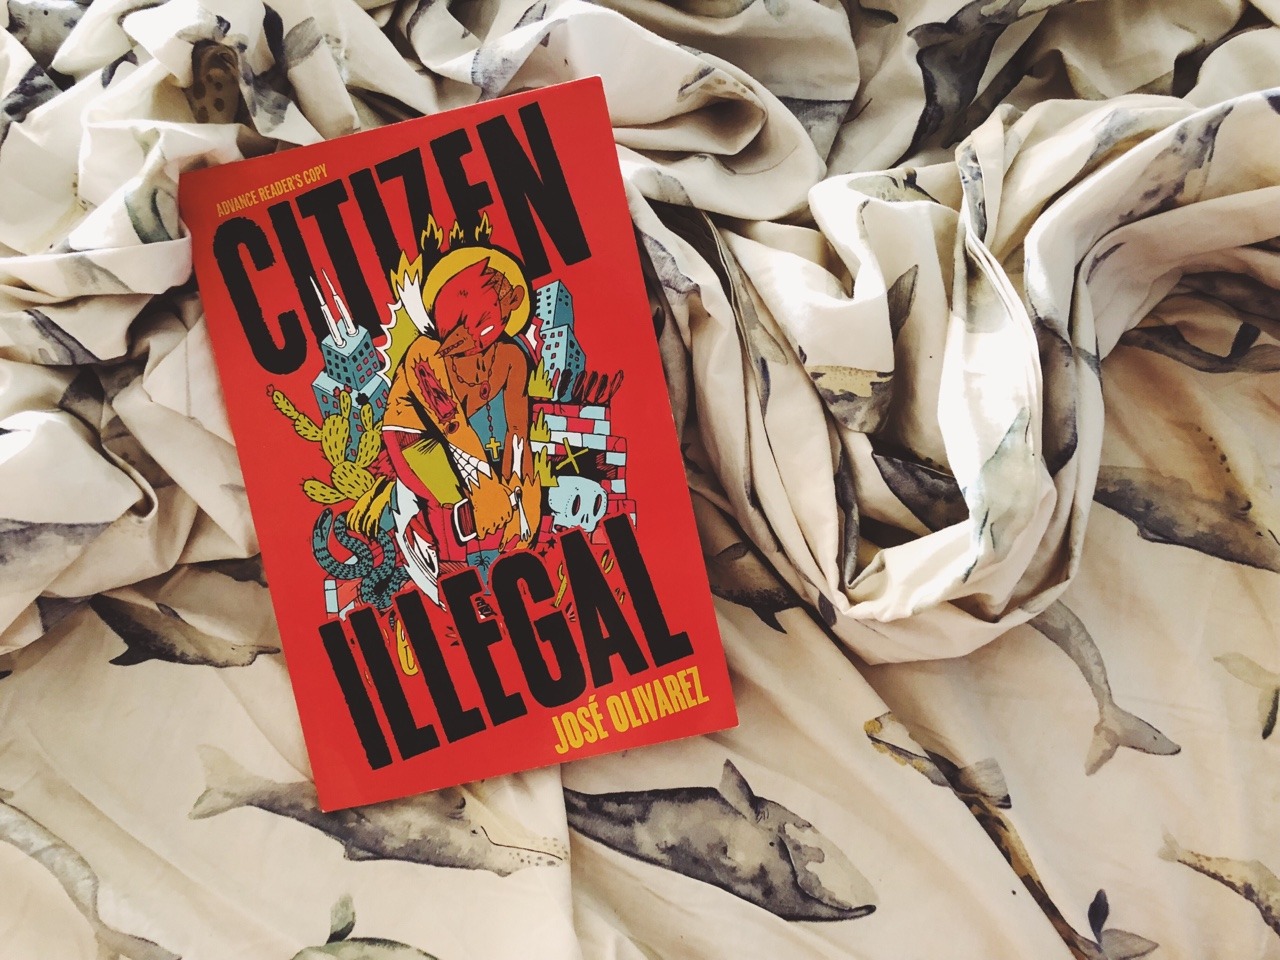 Olivarez's poetry book "Citizen Illegal" captivates readers until its final word. (Image via While Reading and Walking)